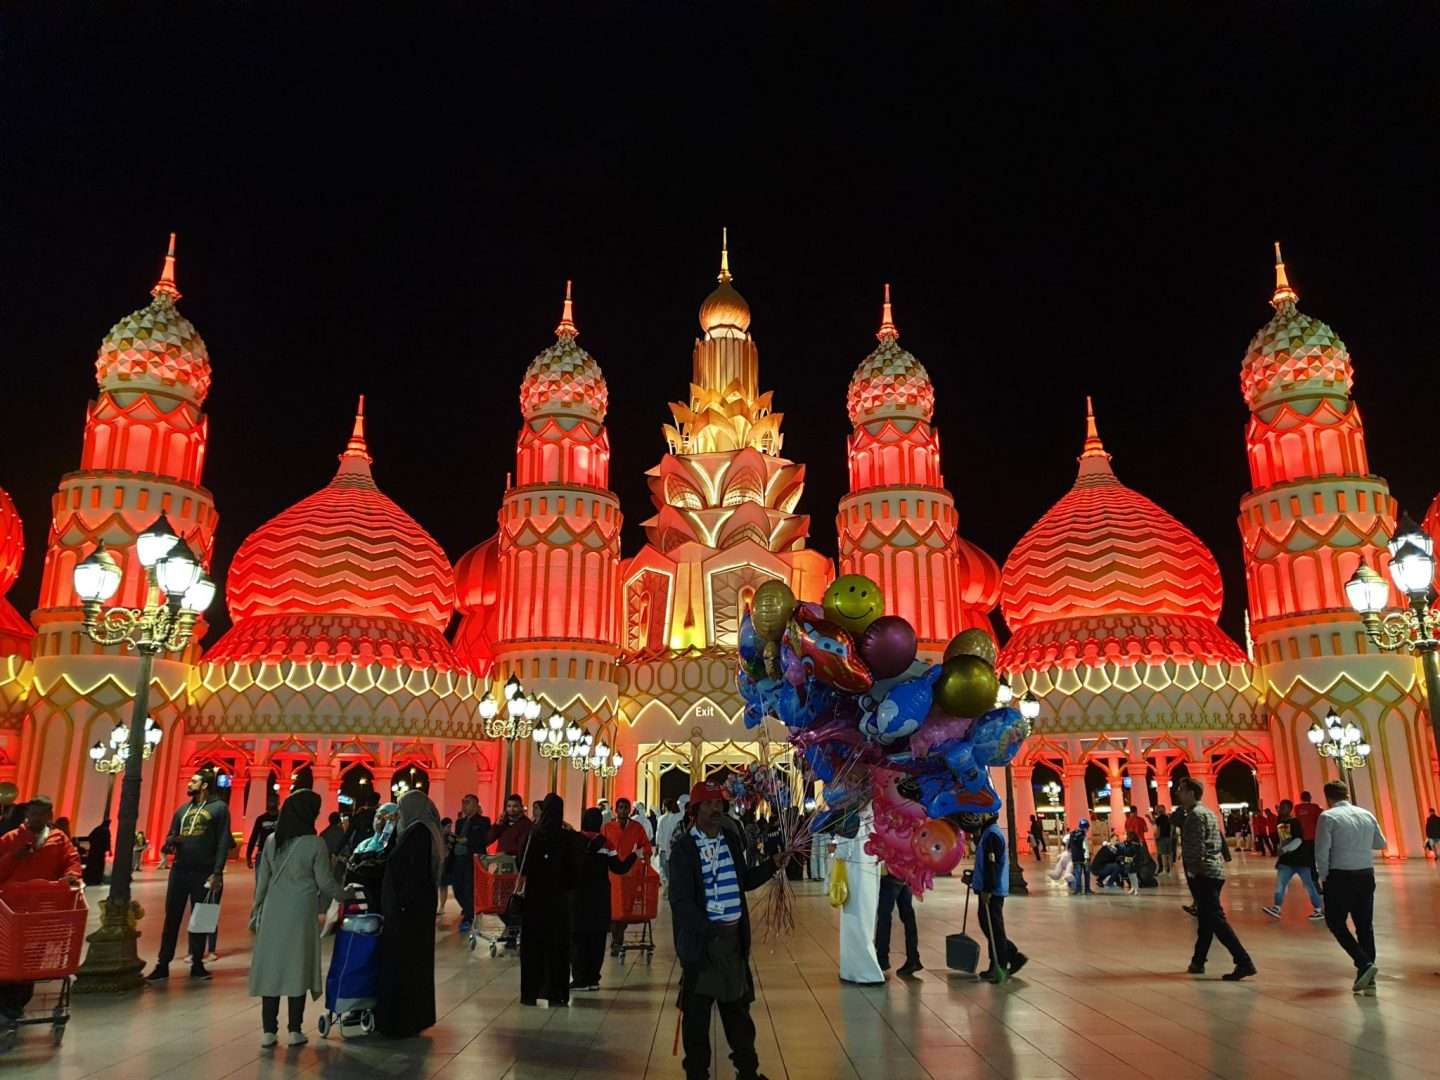 Enter the world of Culture, Shopping of Global Village